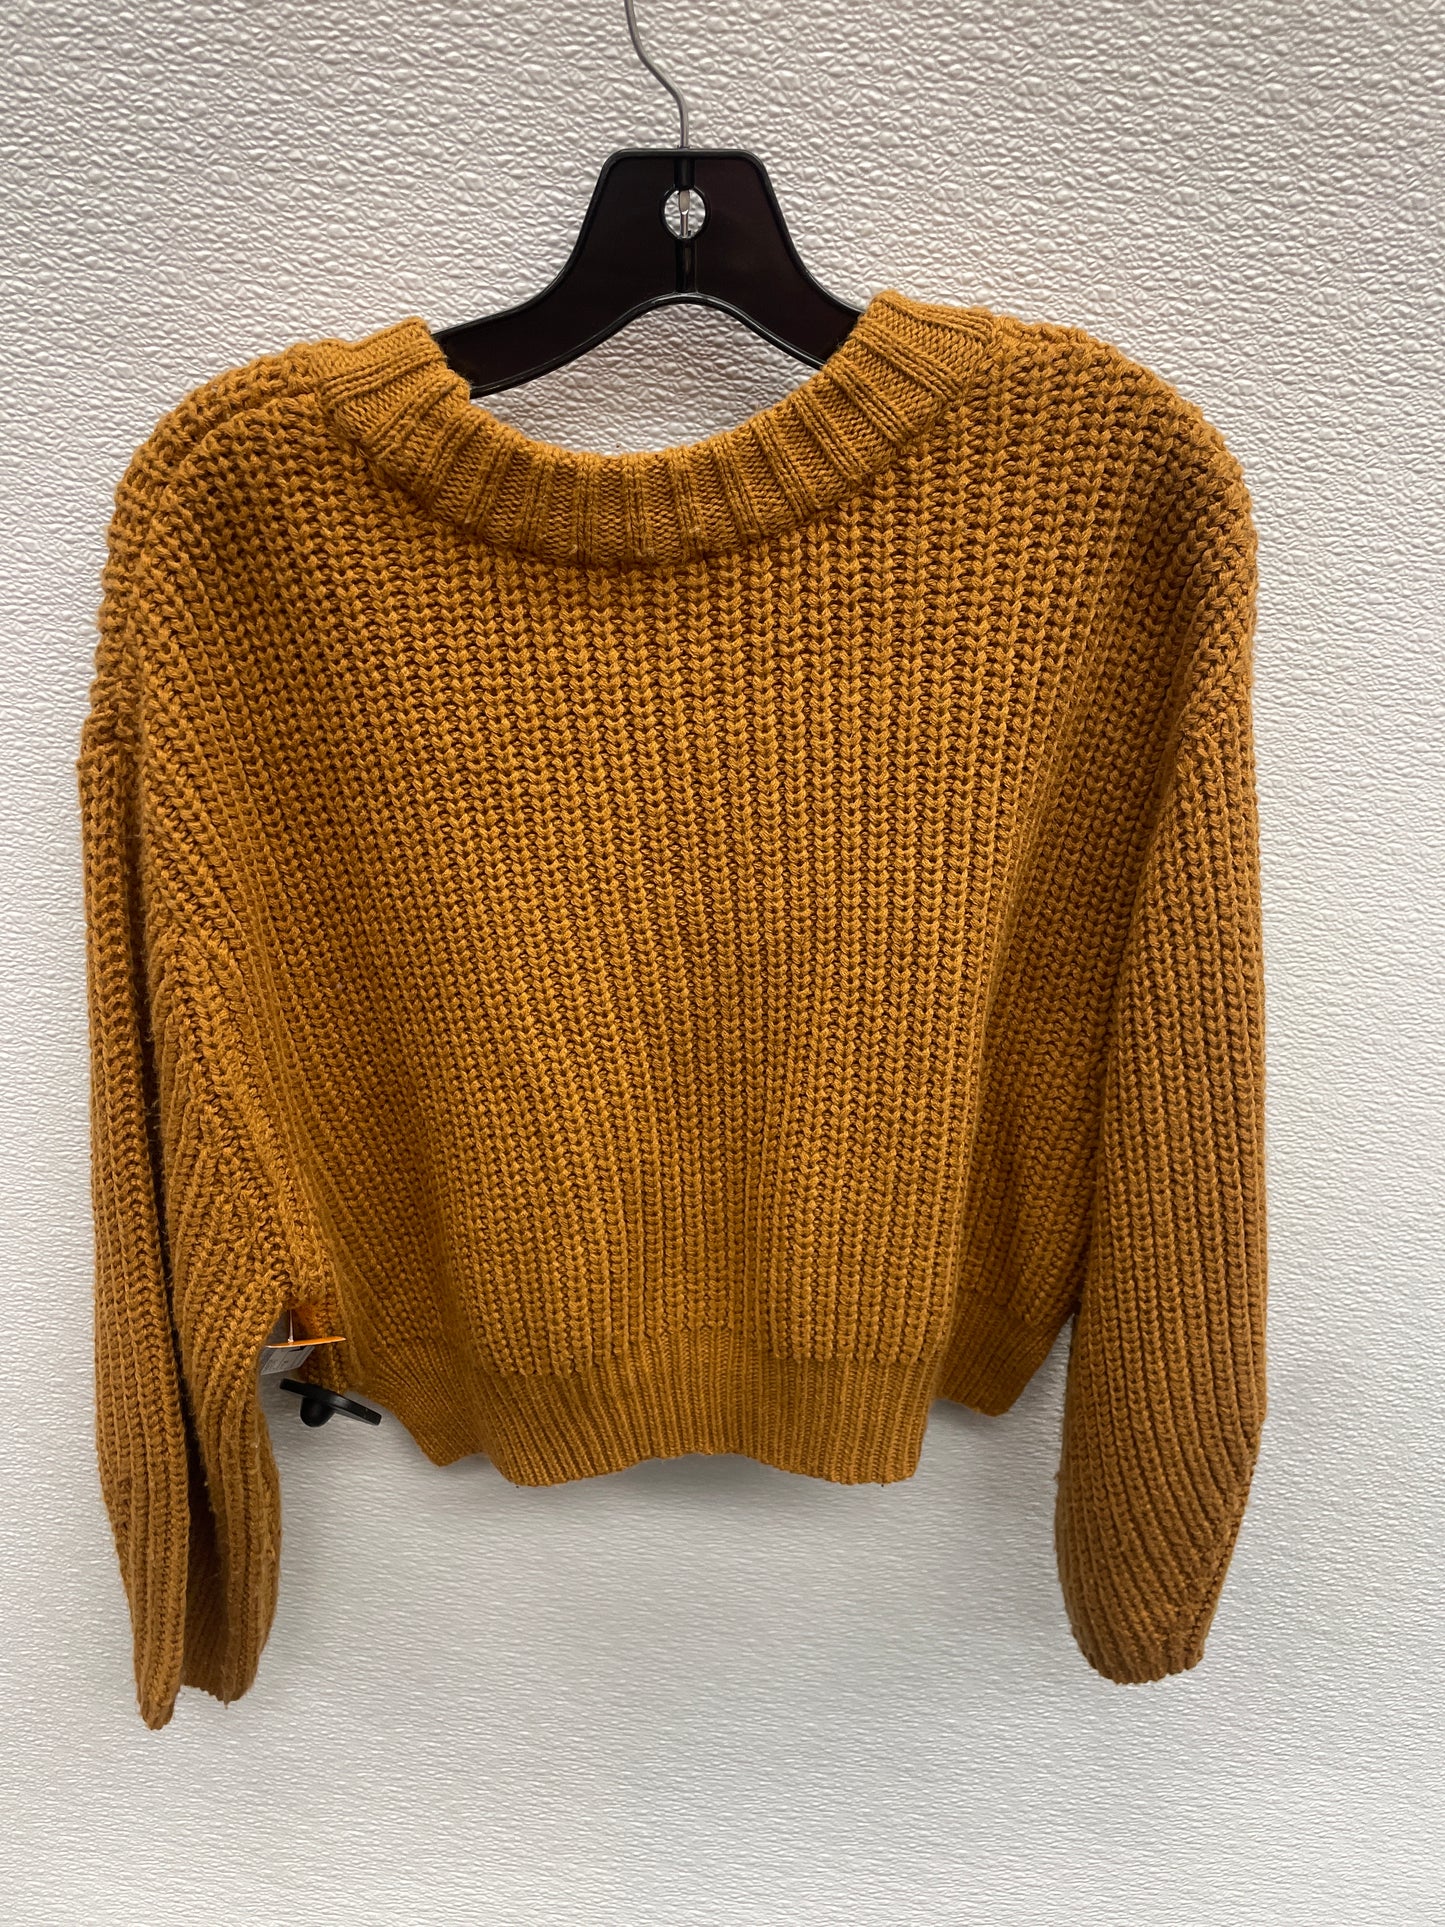 Sweater By Charlotte Russe  Size: M